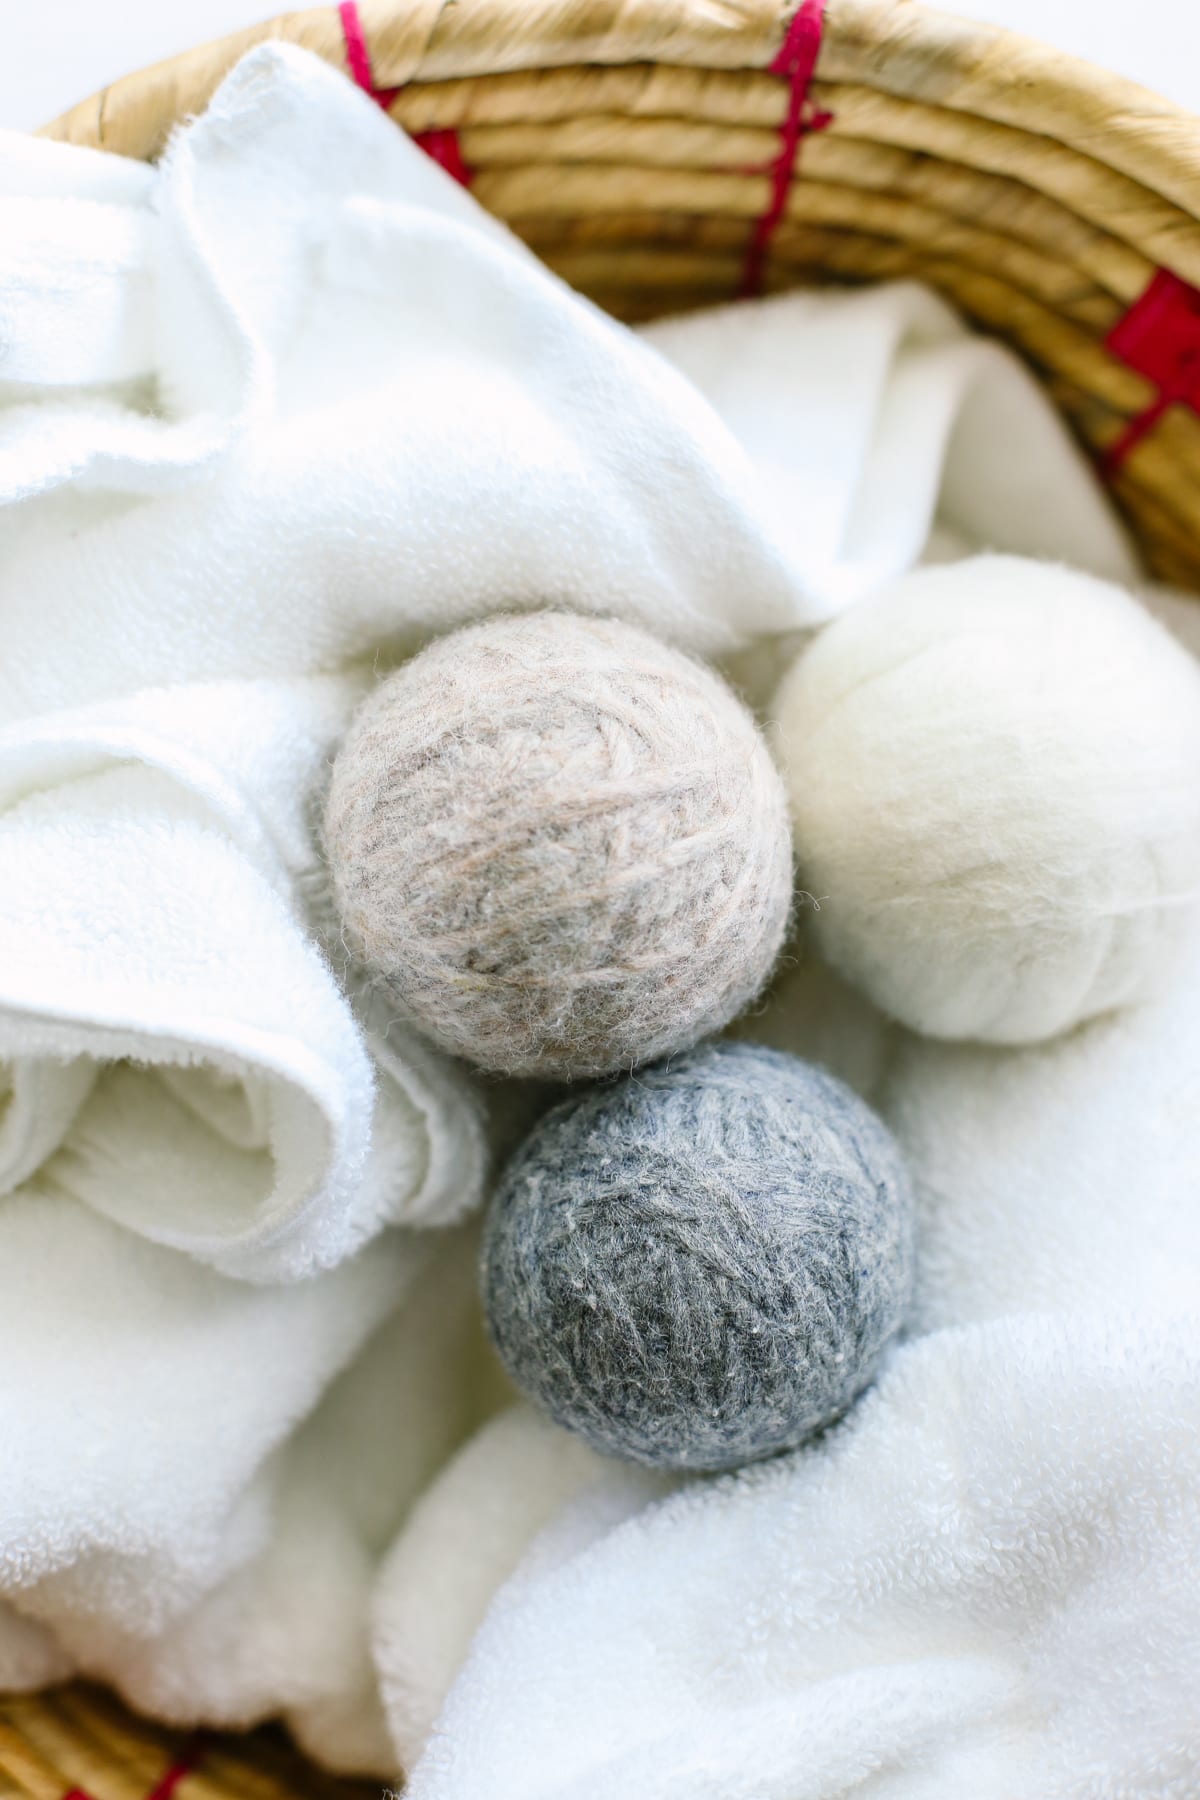 Wool dryer balls sitting in a laundry basket filled with towels.